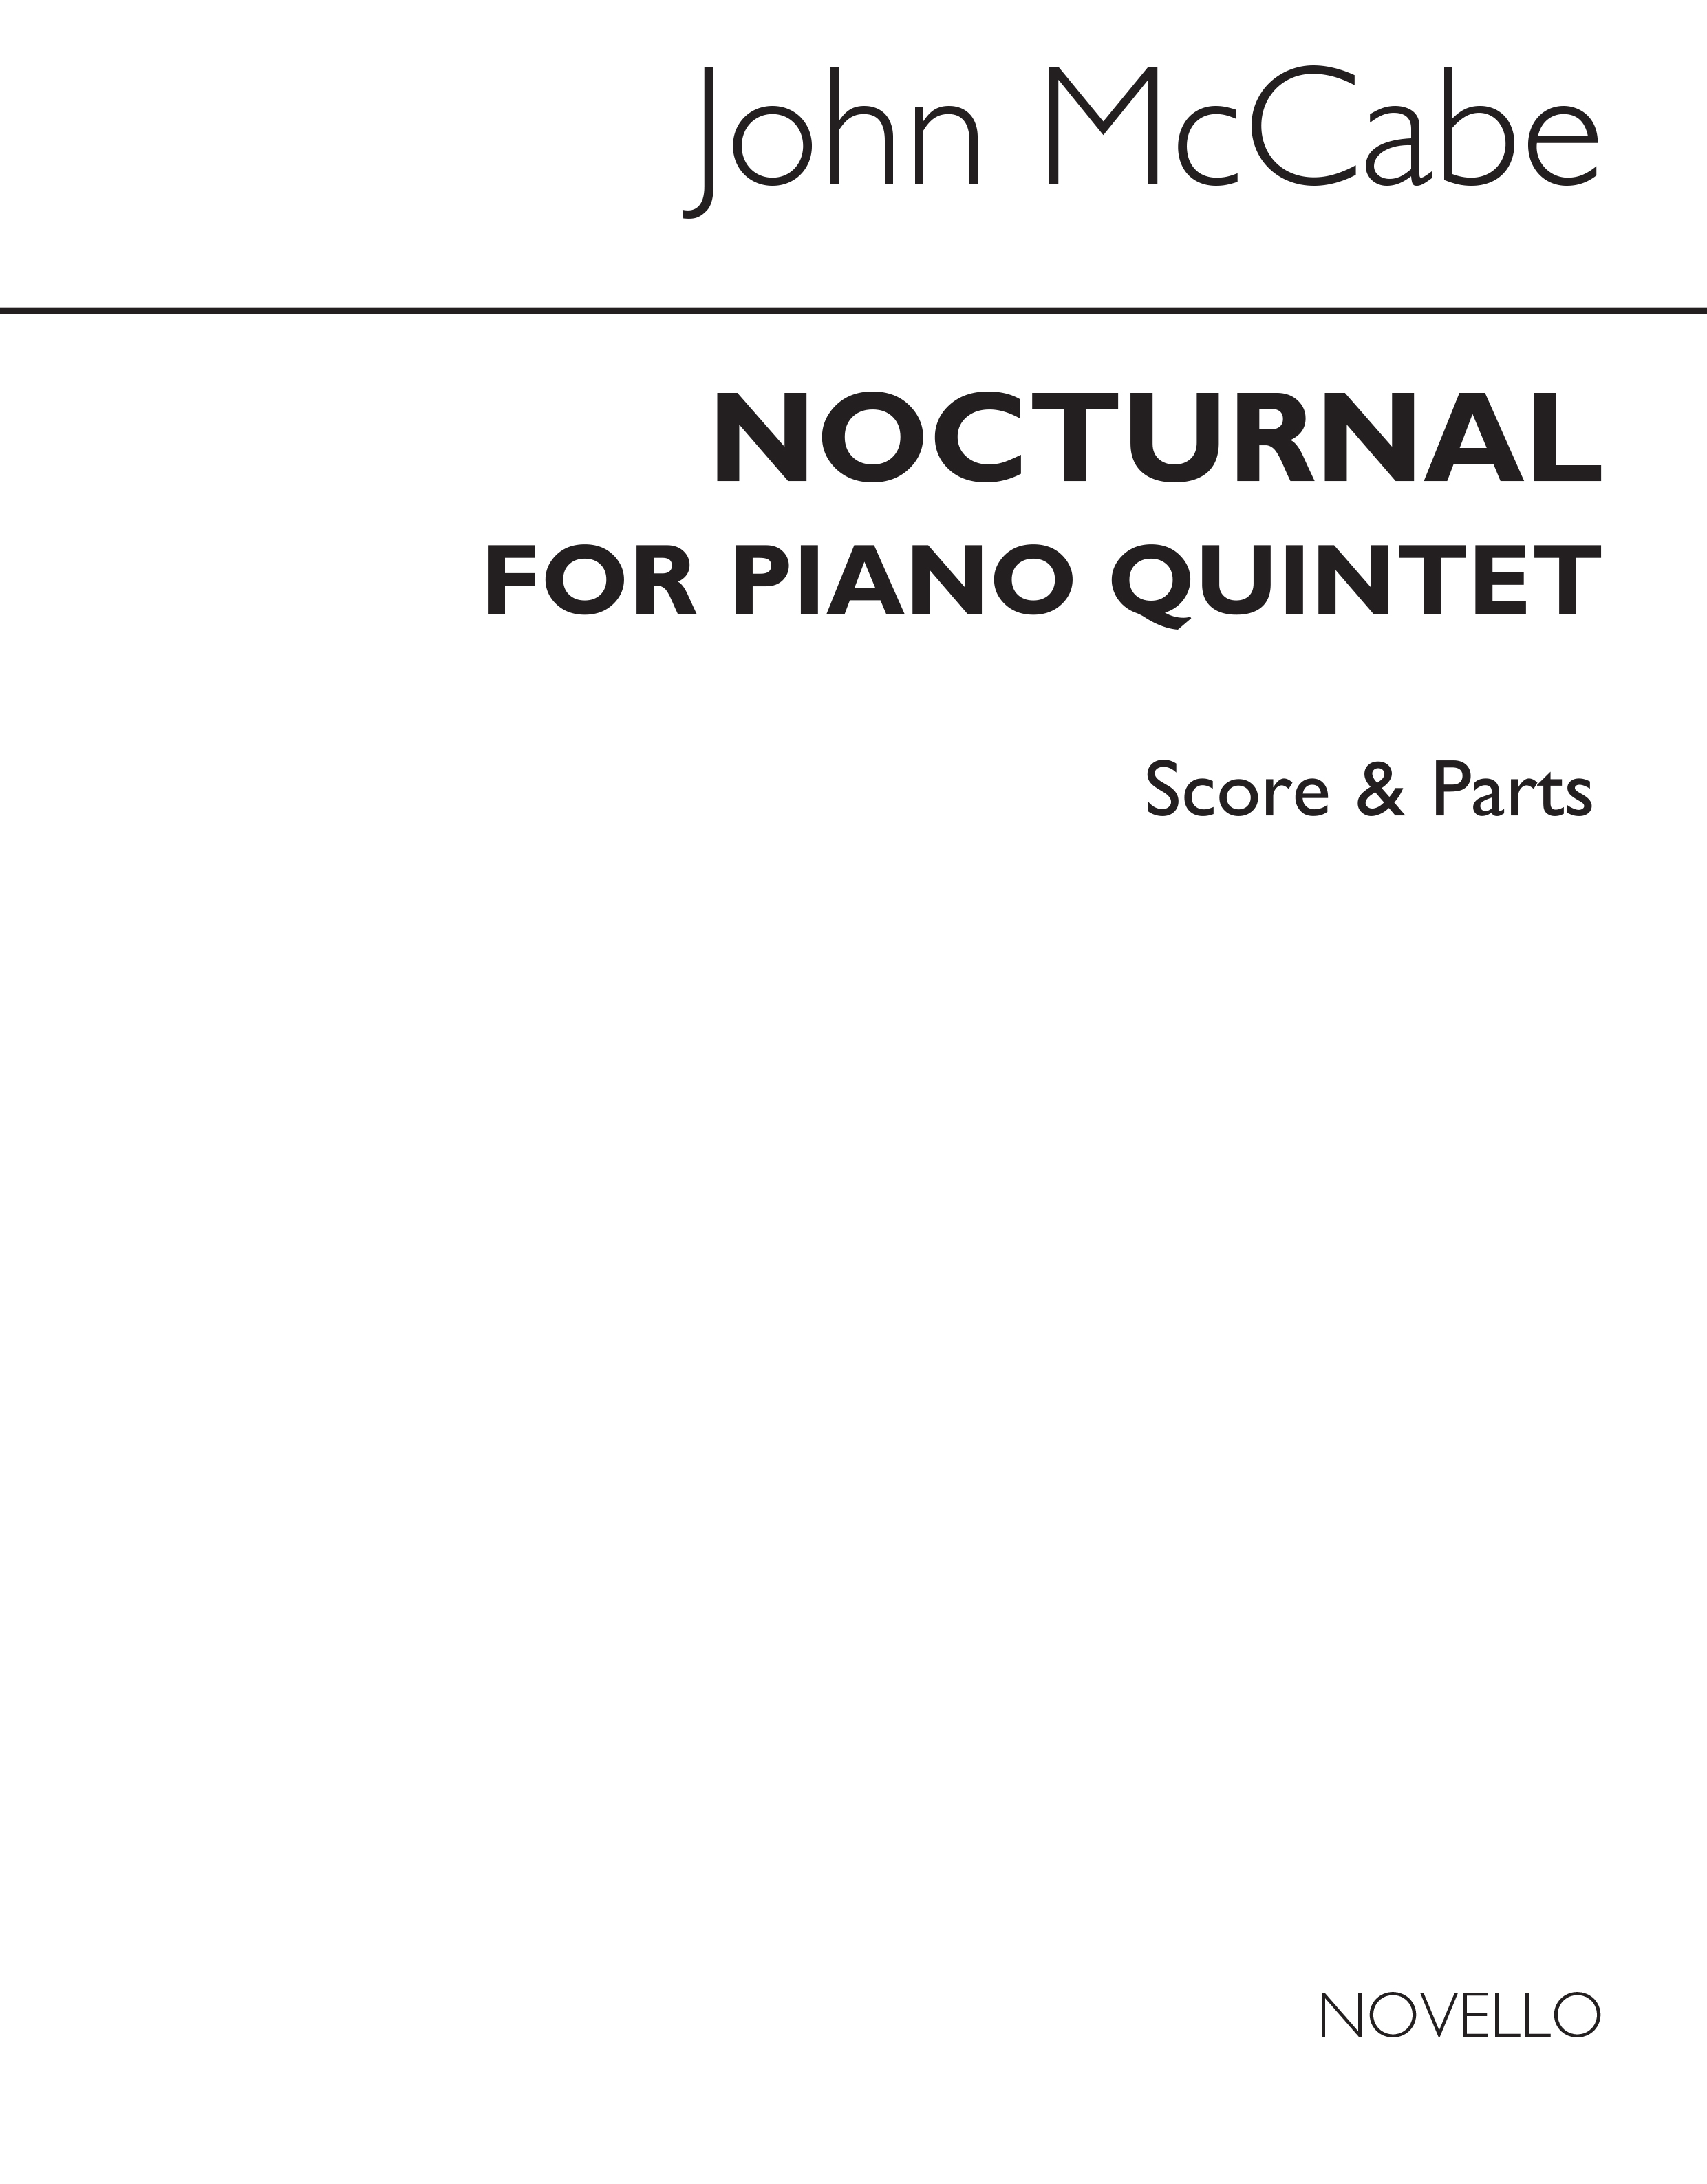 John McCabe: Nocturnal Op.42 For Piano Quintet (Score and Parts)